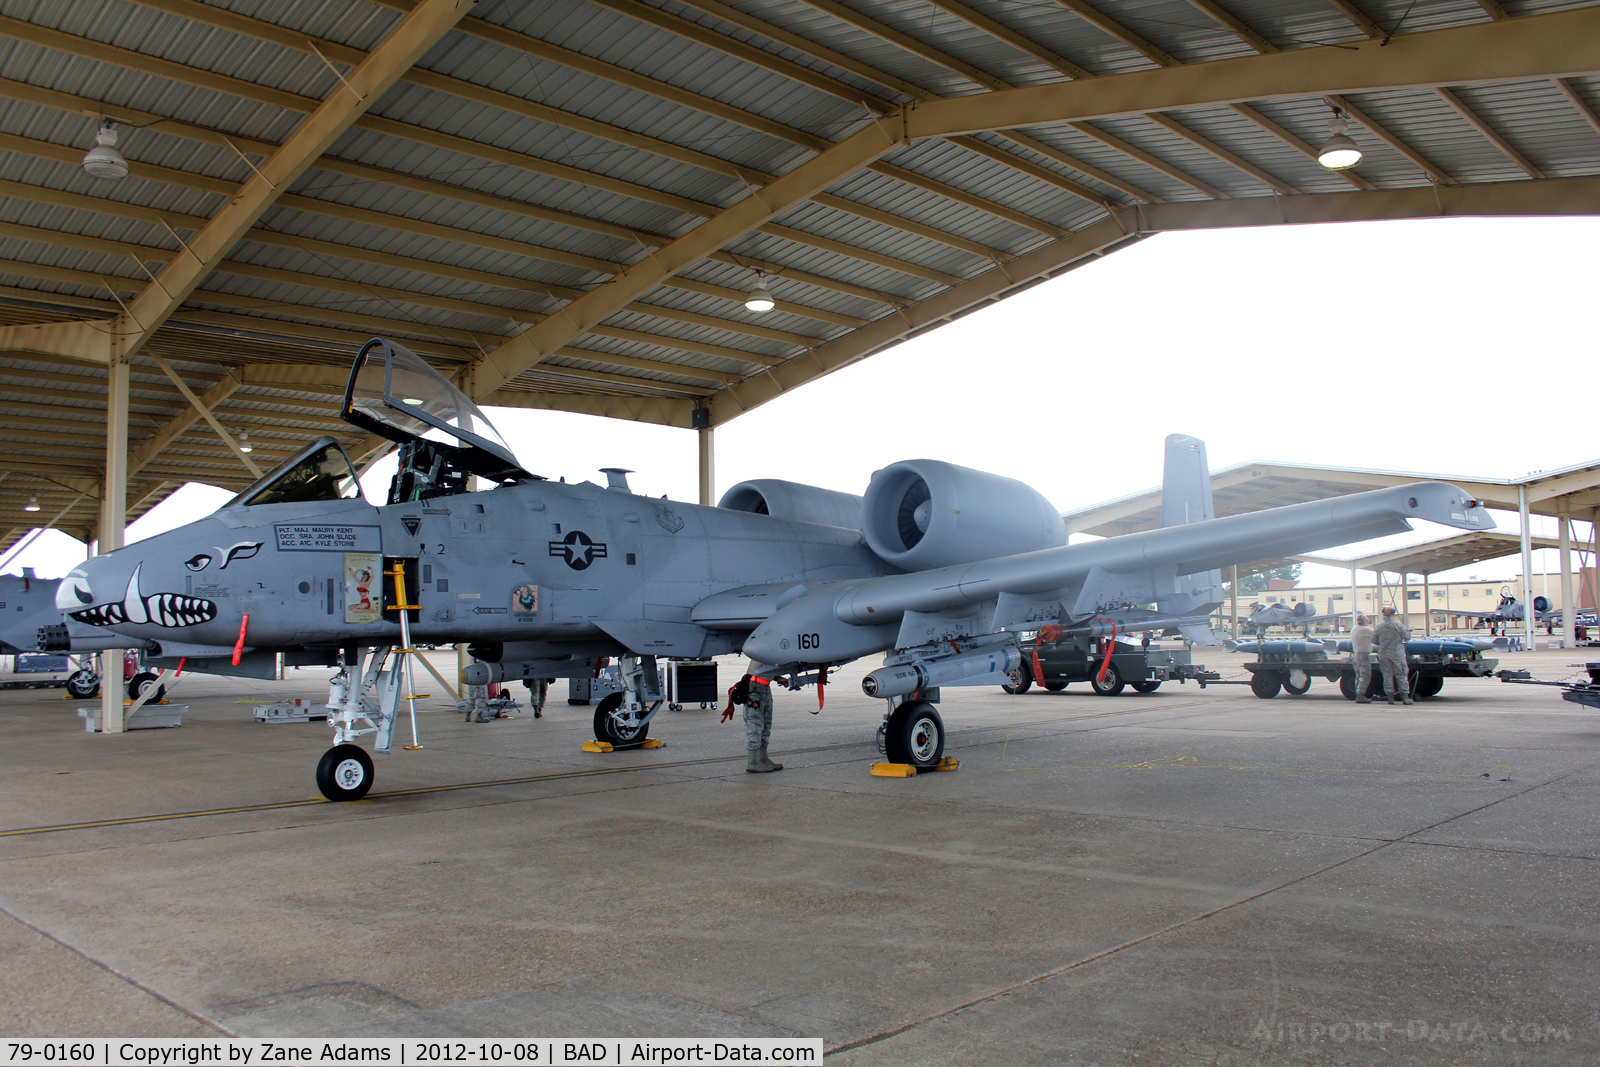 79-0160, 1979 Fairchild Republic A-10C Thunderbolt II C/N A10-0424, At Barksdale Air Force Base -47th Fighter Squadron